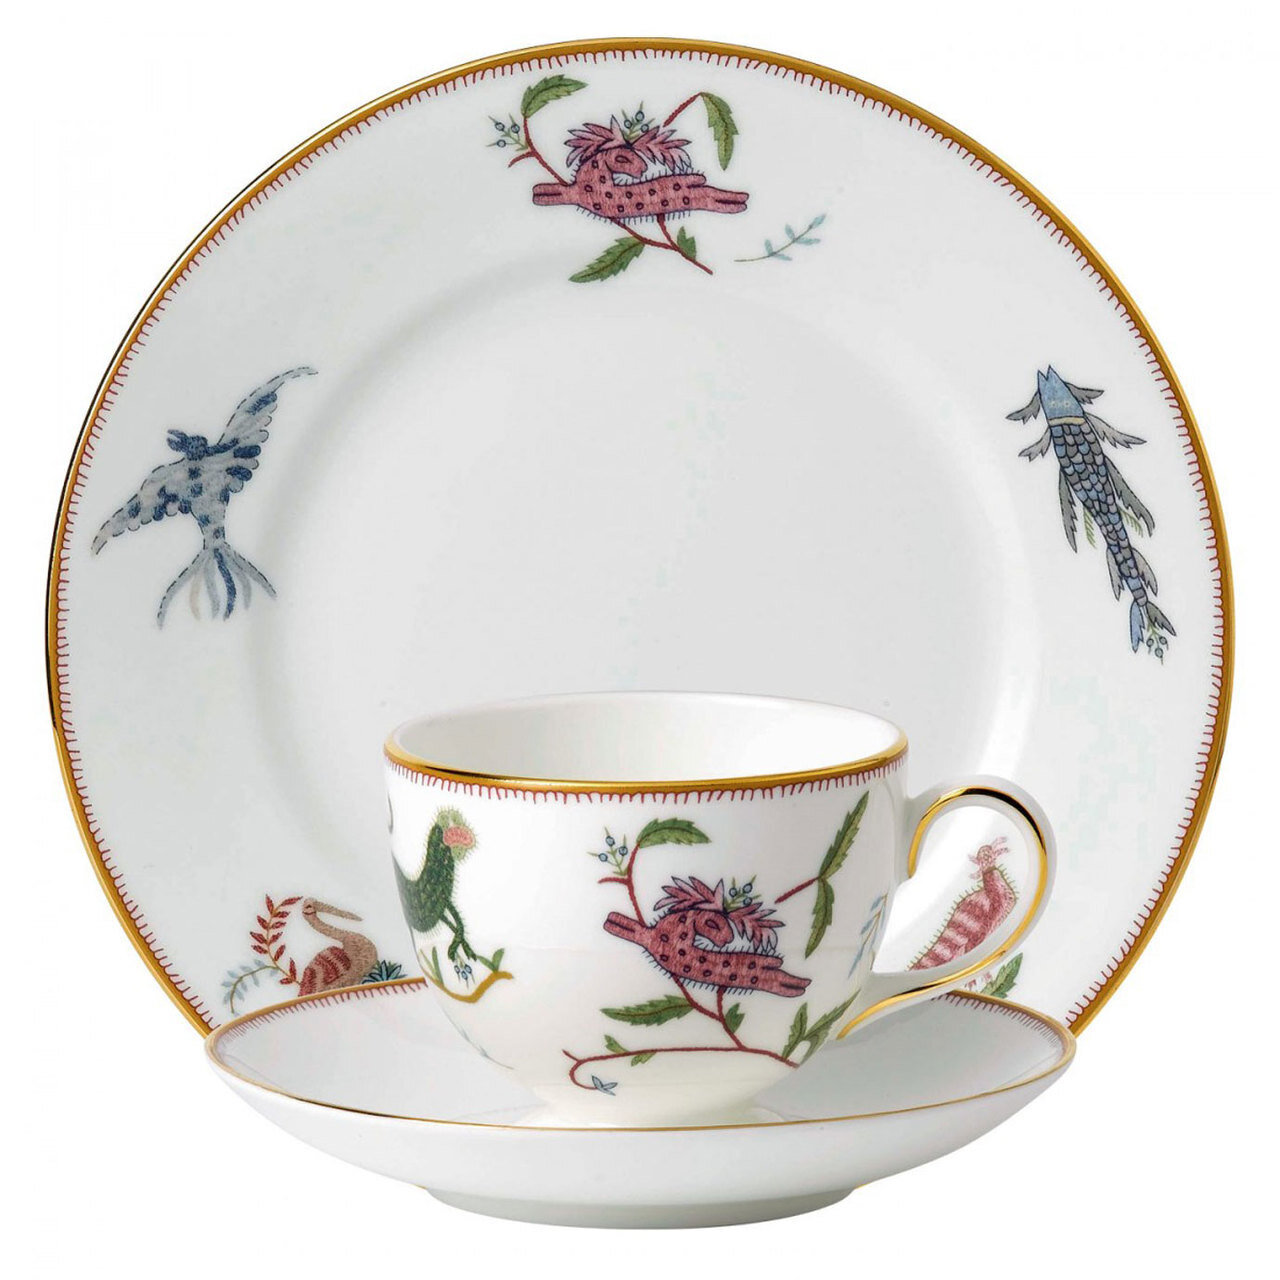 Wedgwood Mythical Creatures Mythical Creatures 3-Piece Set Teacup, Saucer & Plate 8 Inch